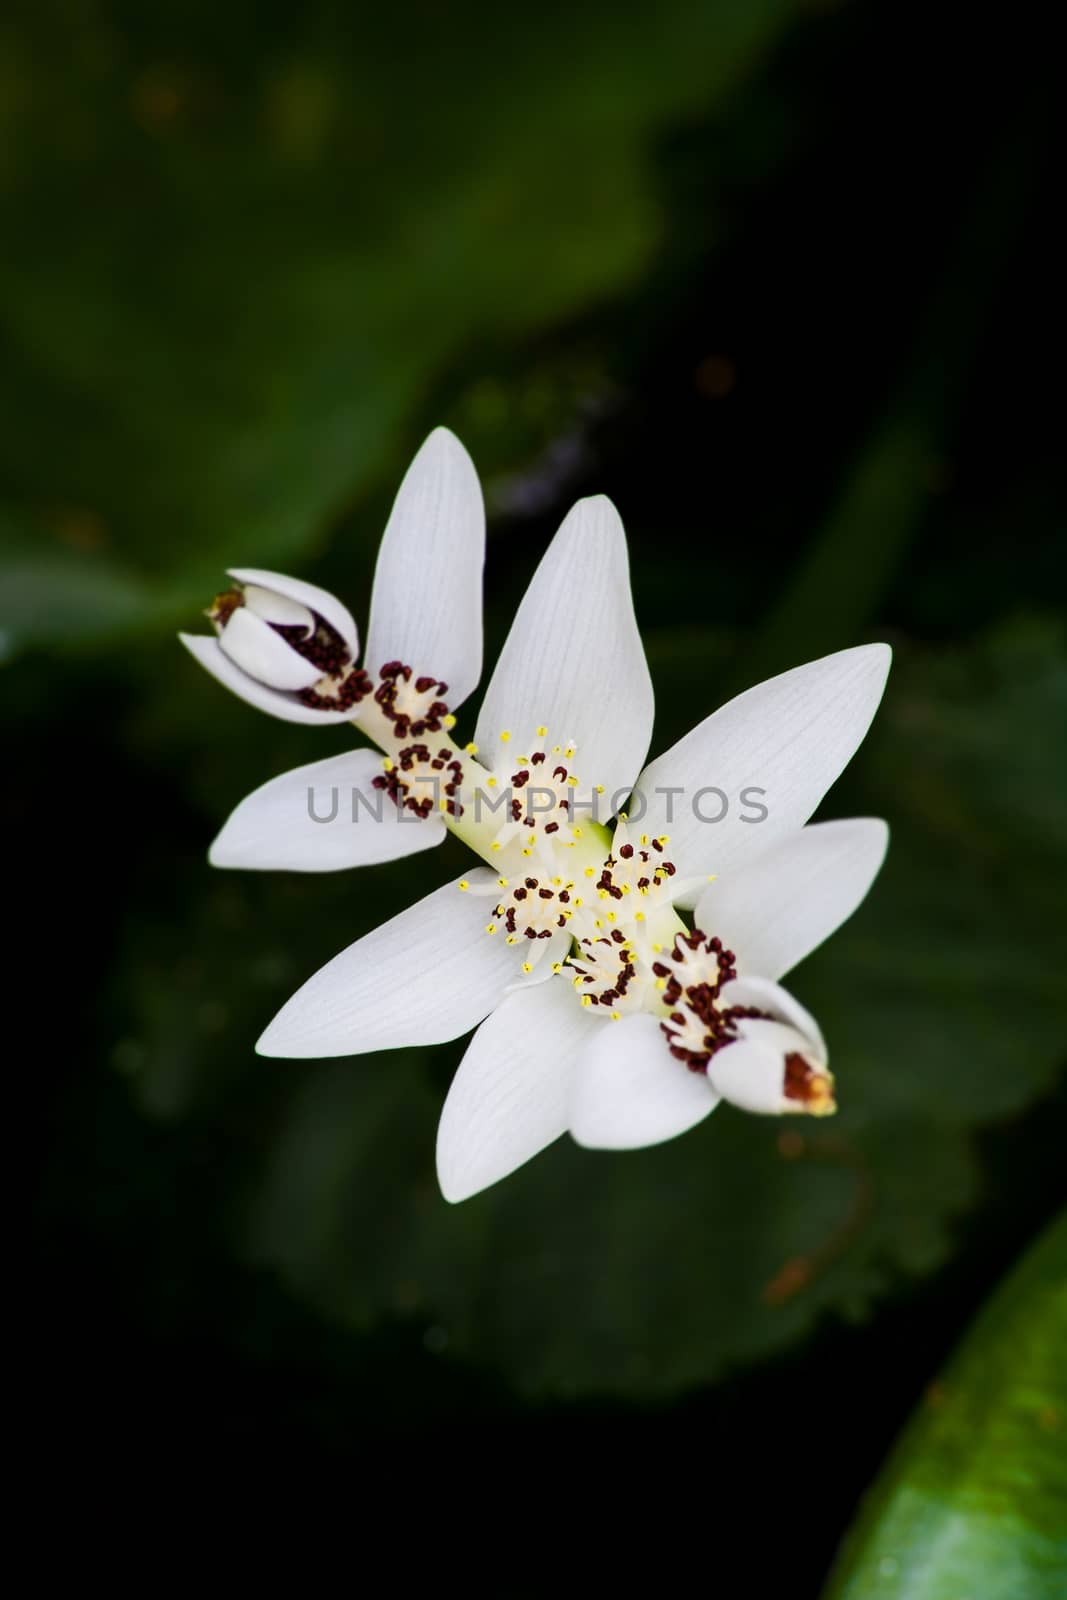 Cape Pond Weed (Aponogeton distachyos) by kobus_peche